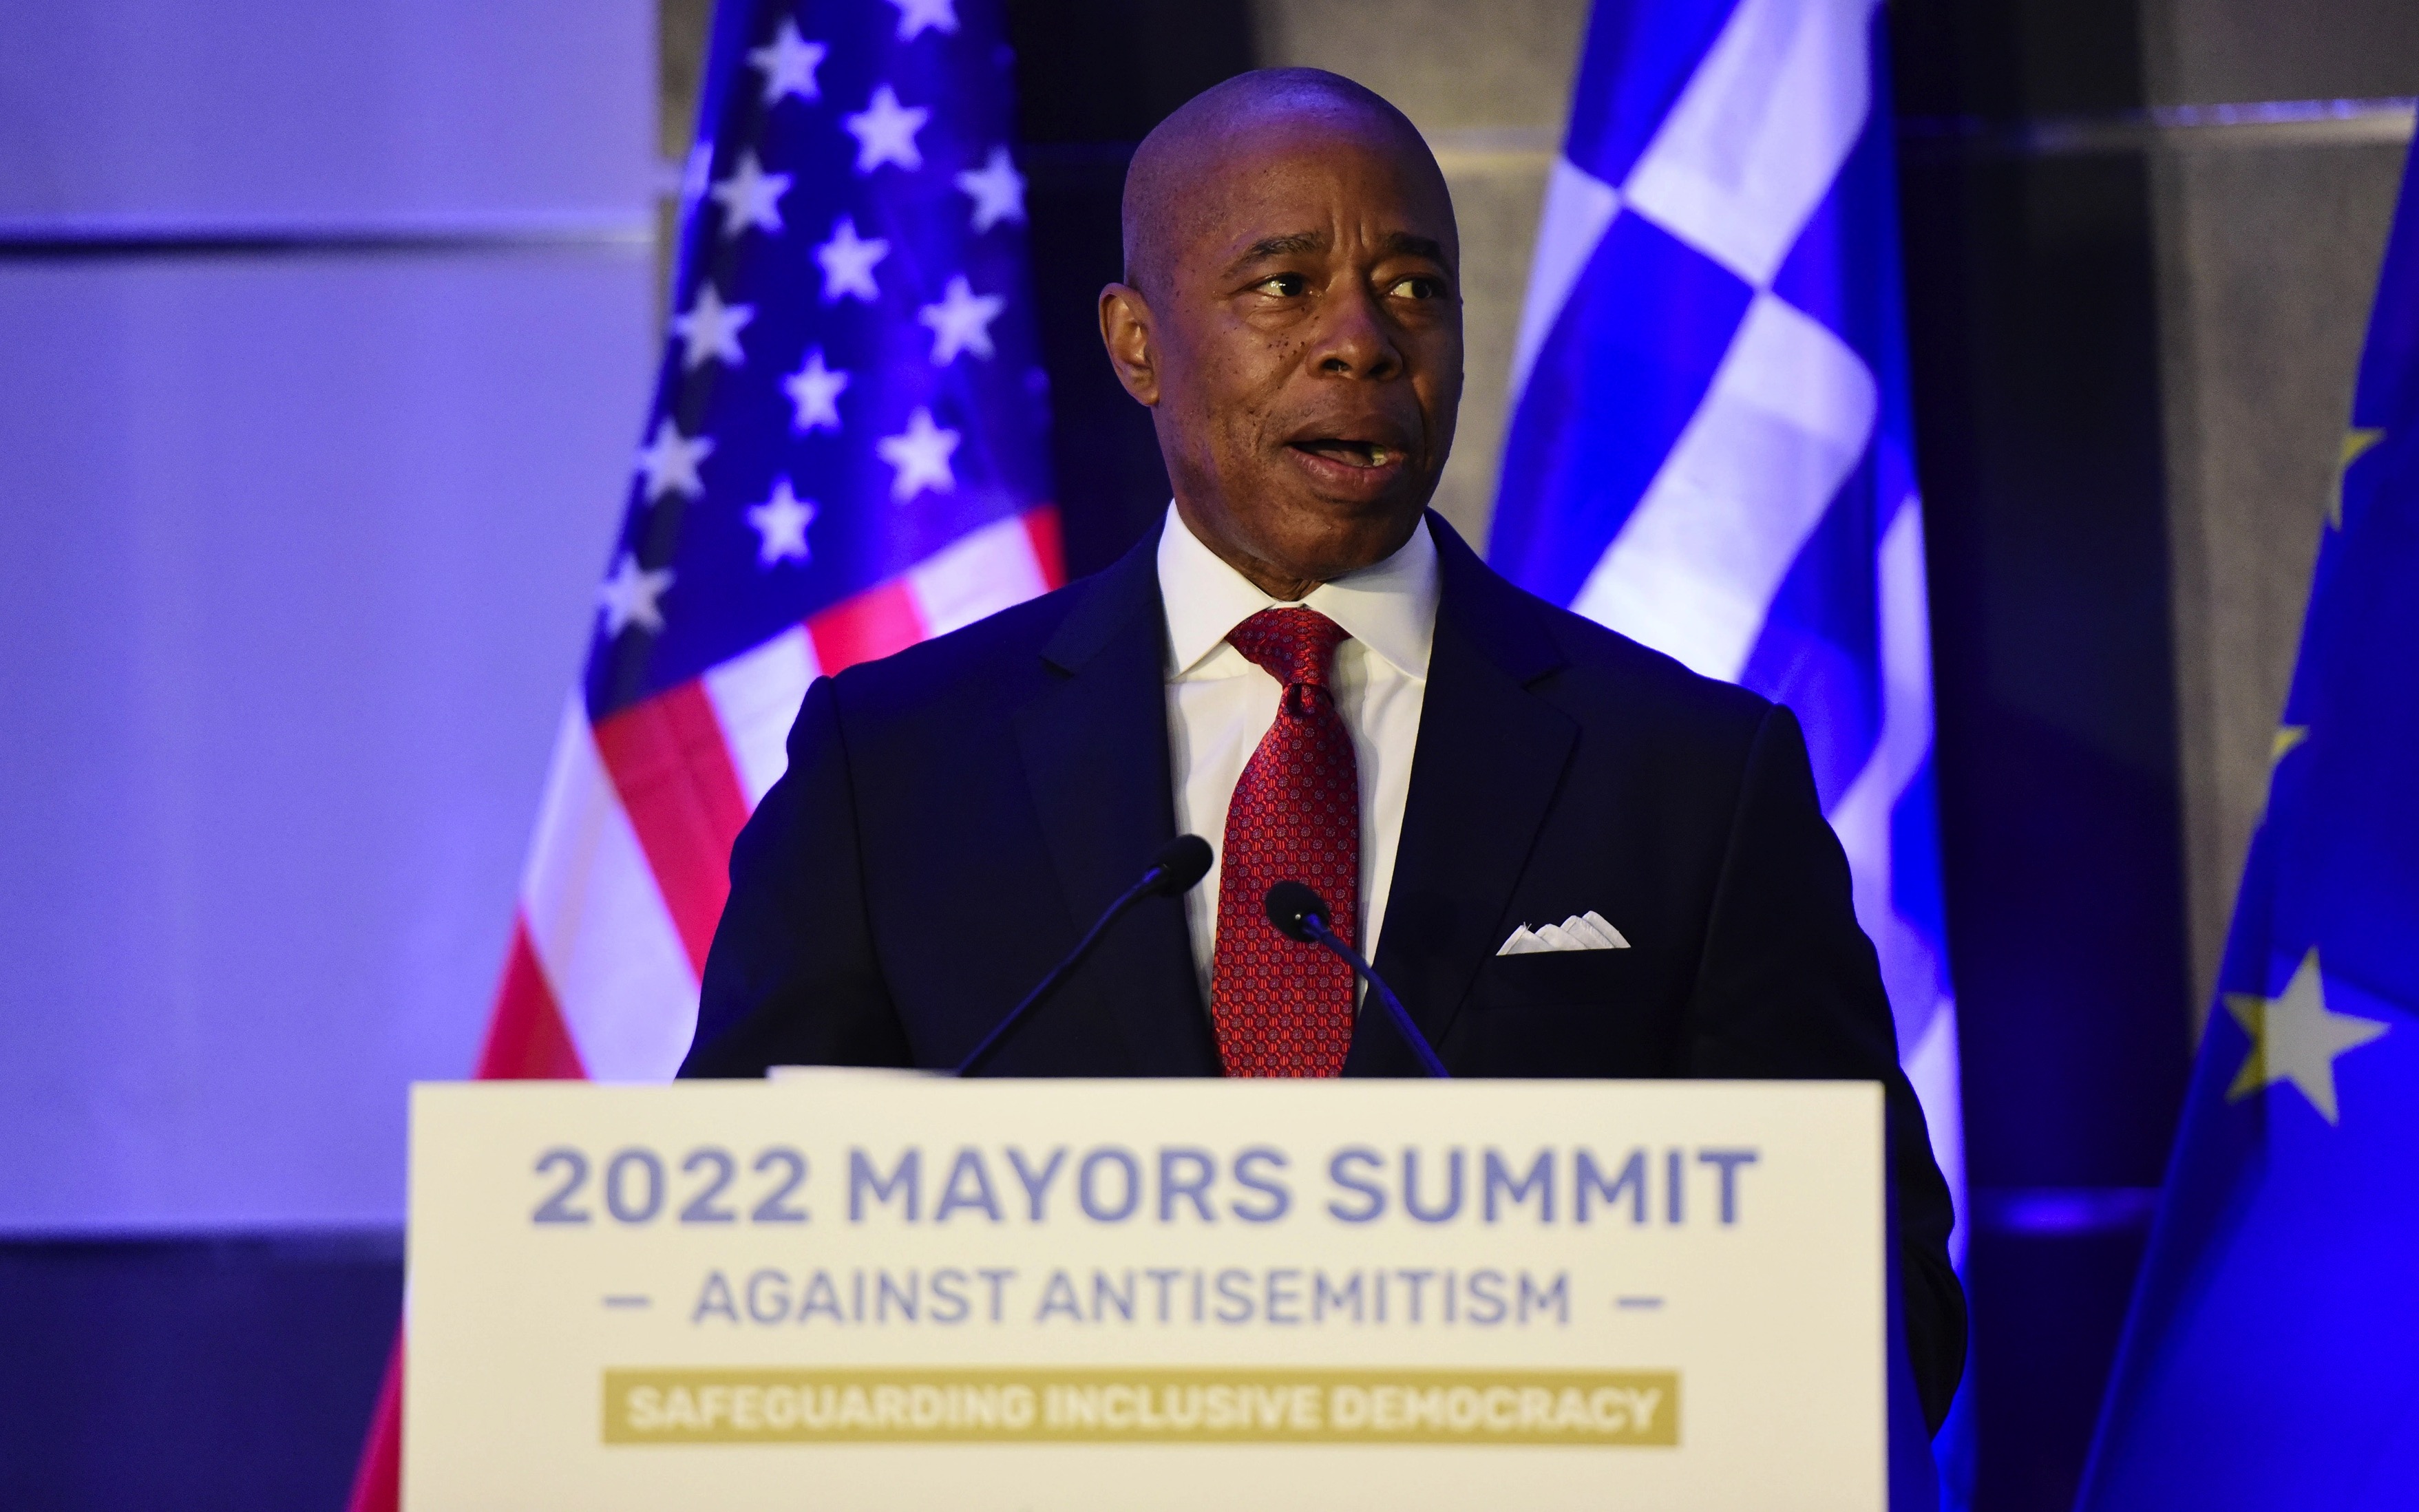 global-mayors-ponder-fight-against-antisemitism-in-athens1